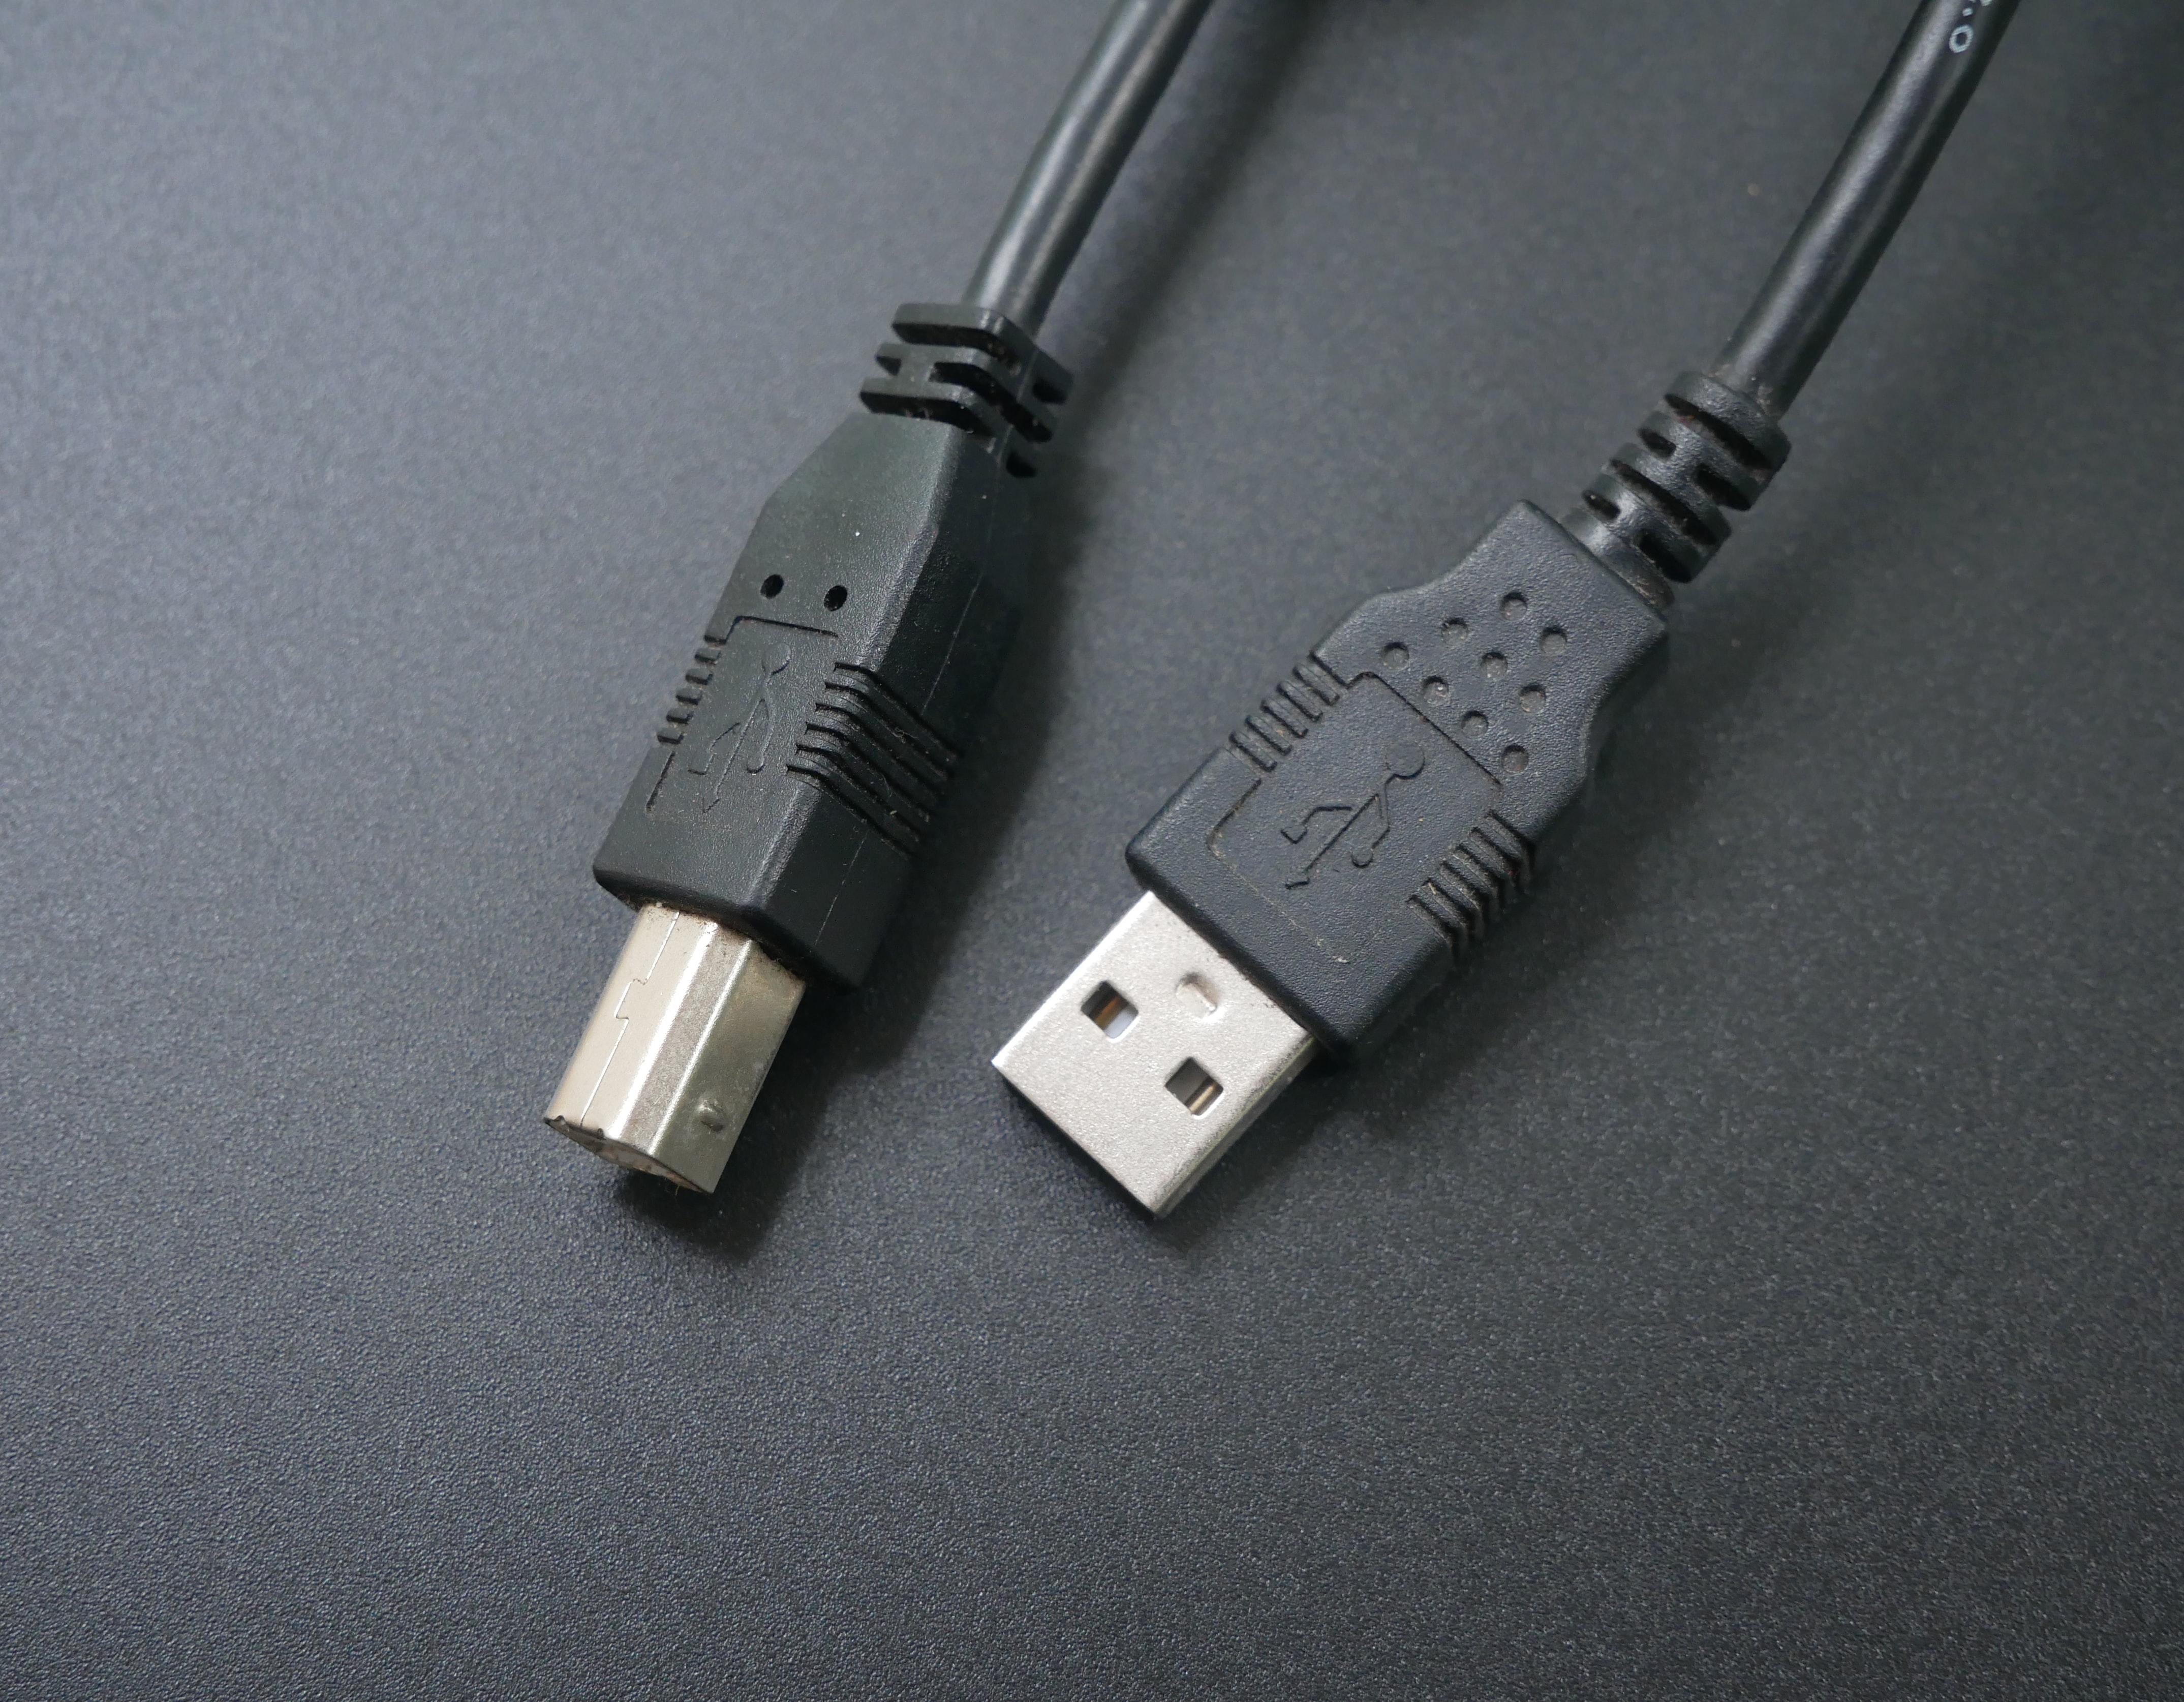 What is the difference between Micro A and Micro B USB